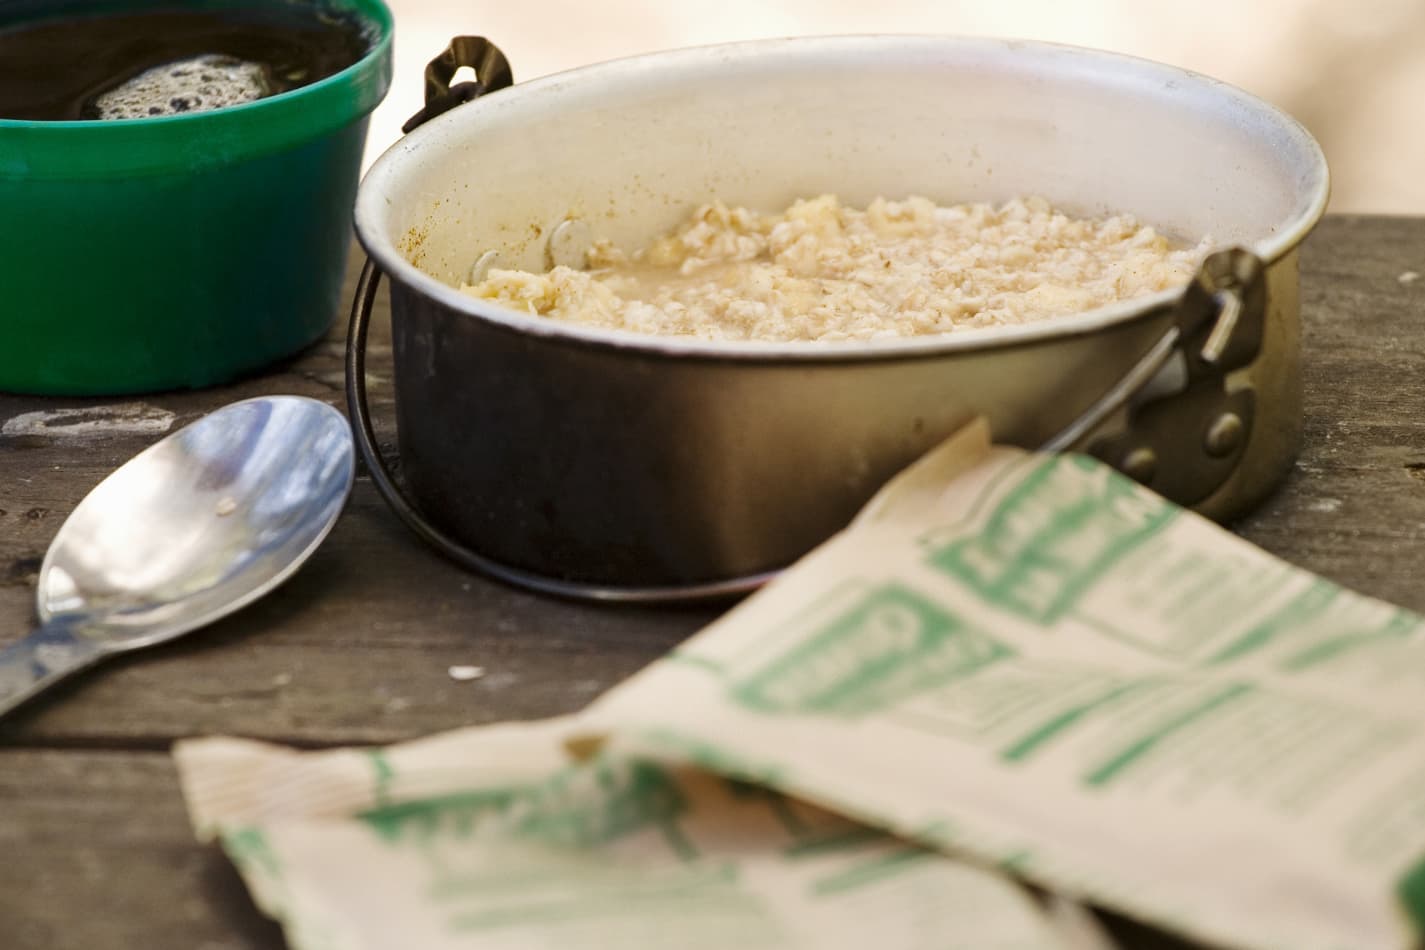 Having oatmeal on the trail is a perfect way to get your morning nutrition while cold soaking backpacking